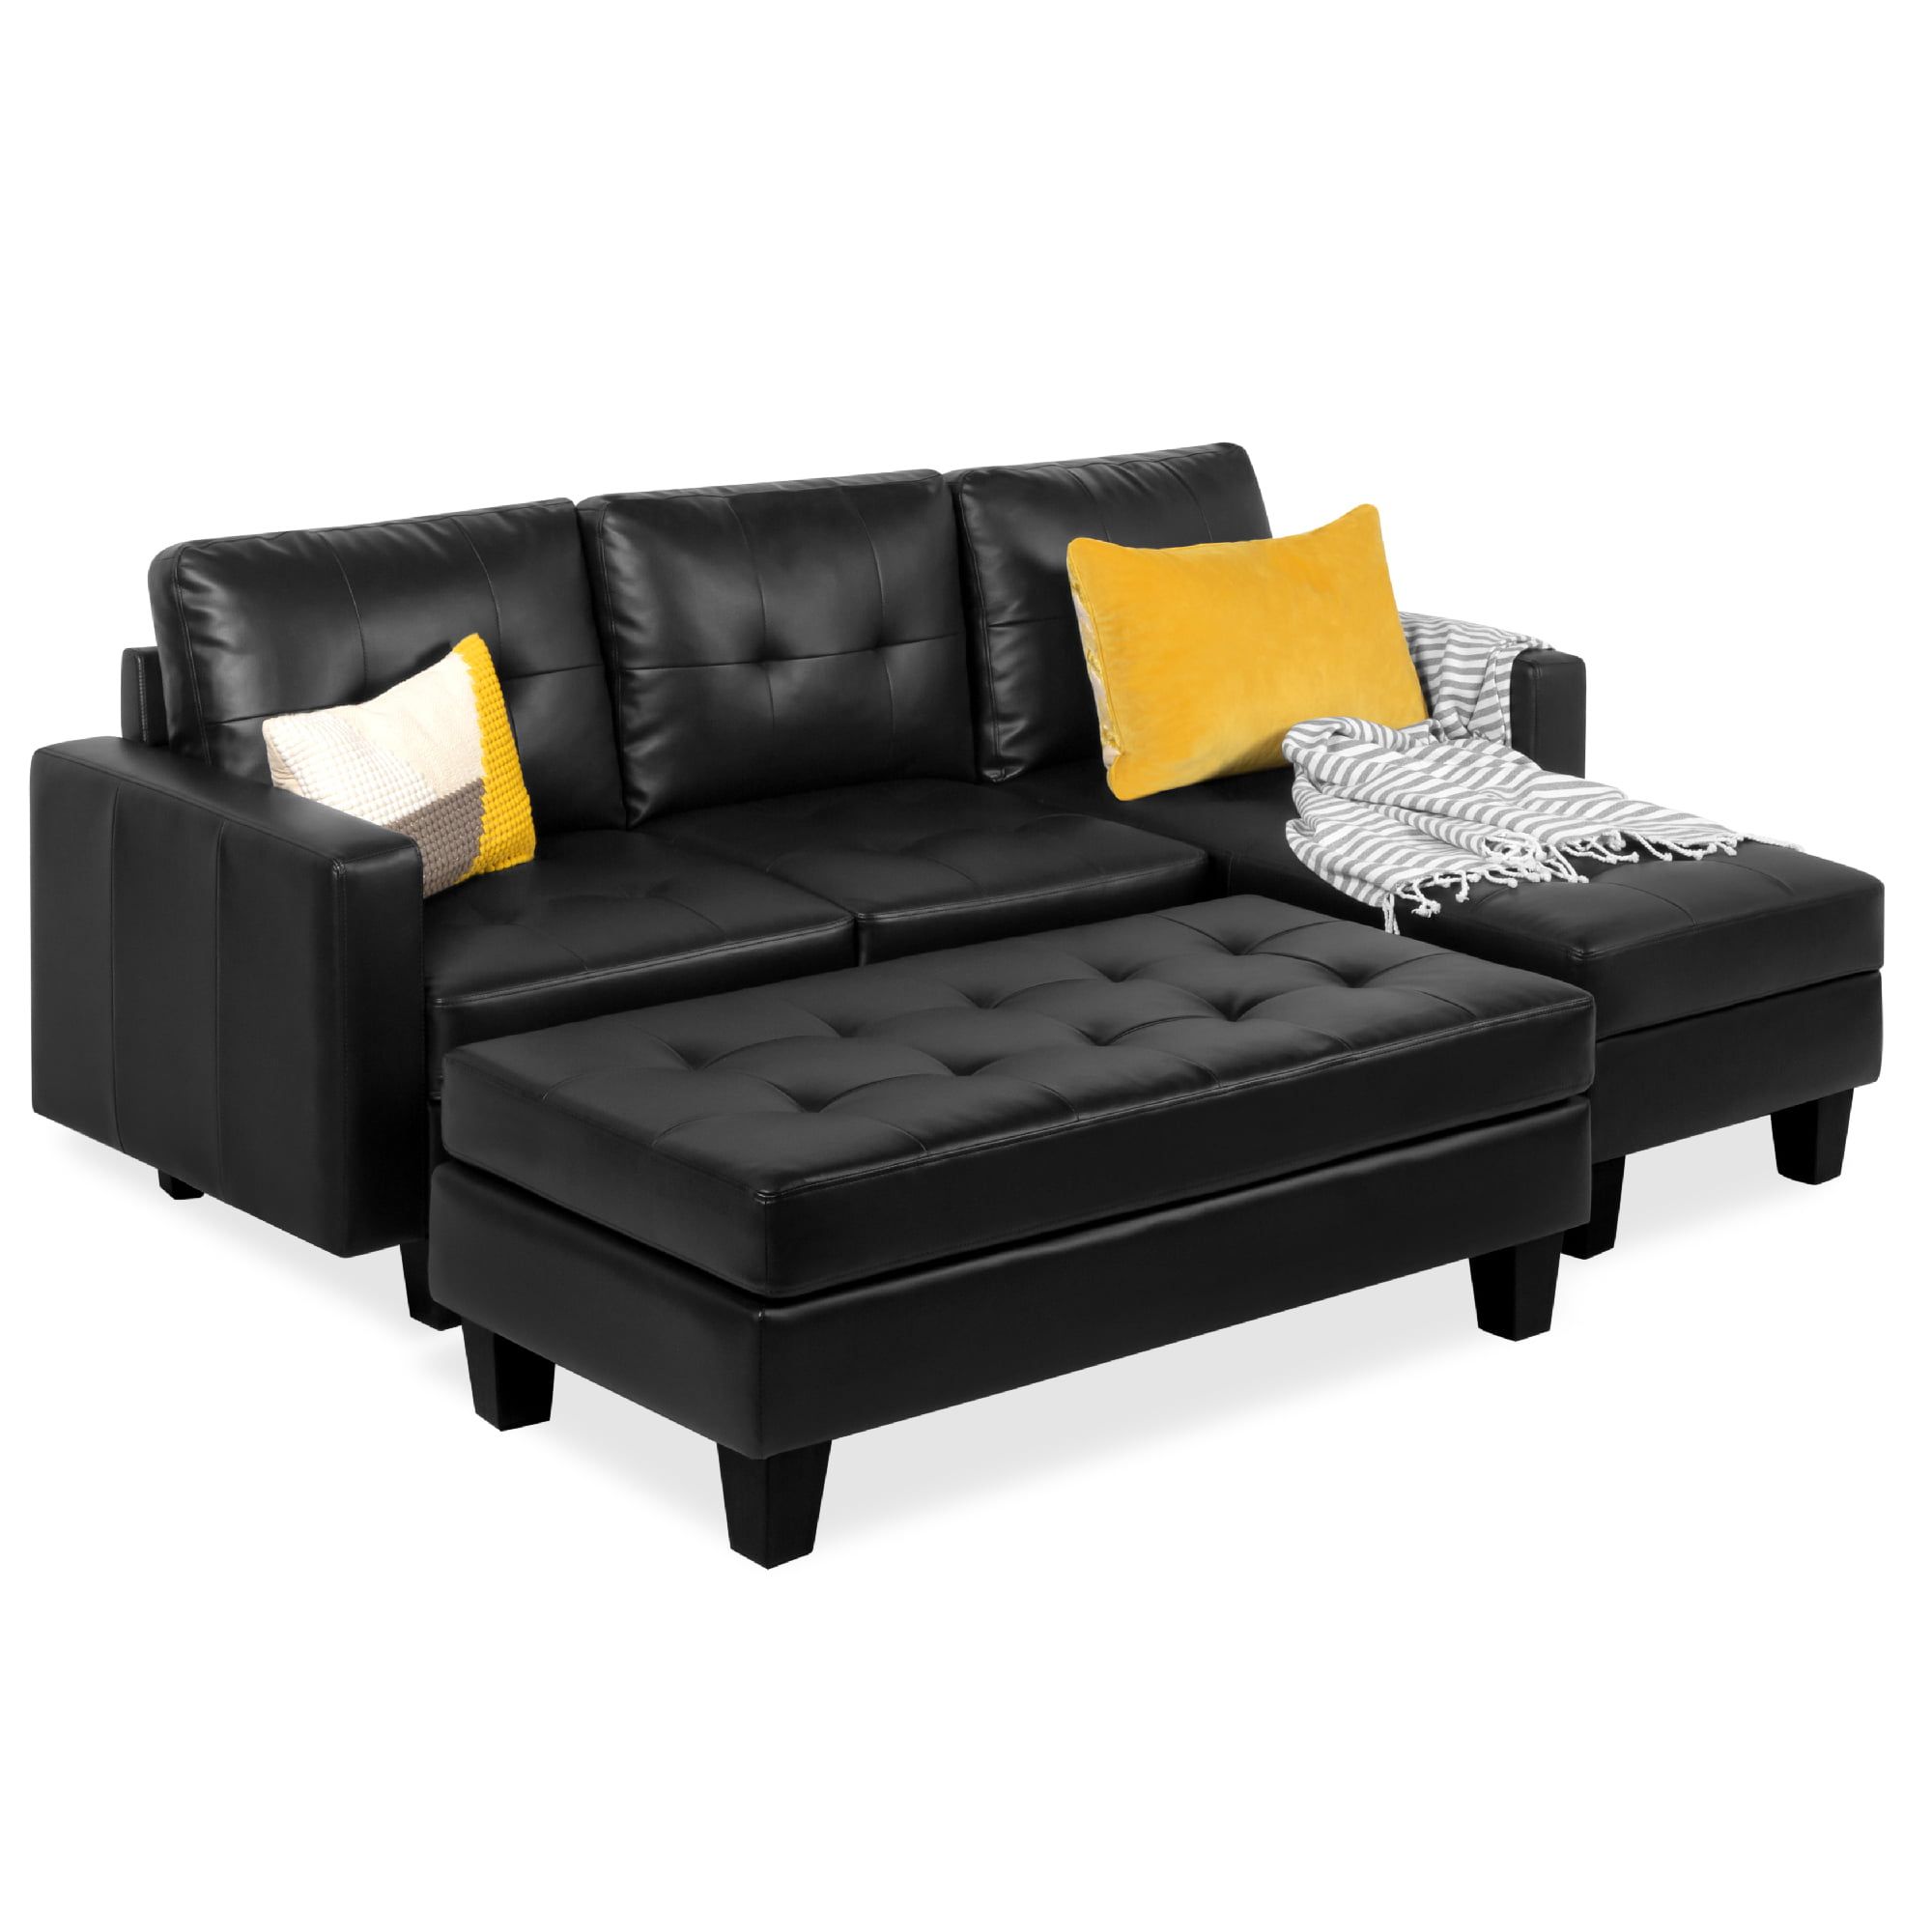 Best Choice Products 3 Seat L Shape Tufted Faux Leather Sectional Sofa With 3 Seat L Shaped Sofas In Black (View 3 of 20)